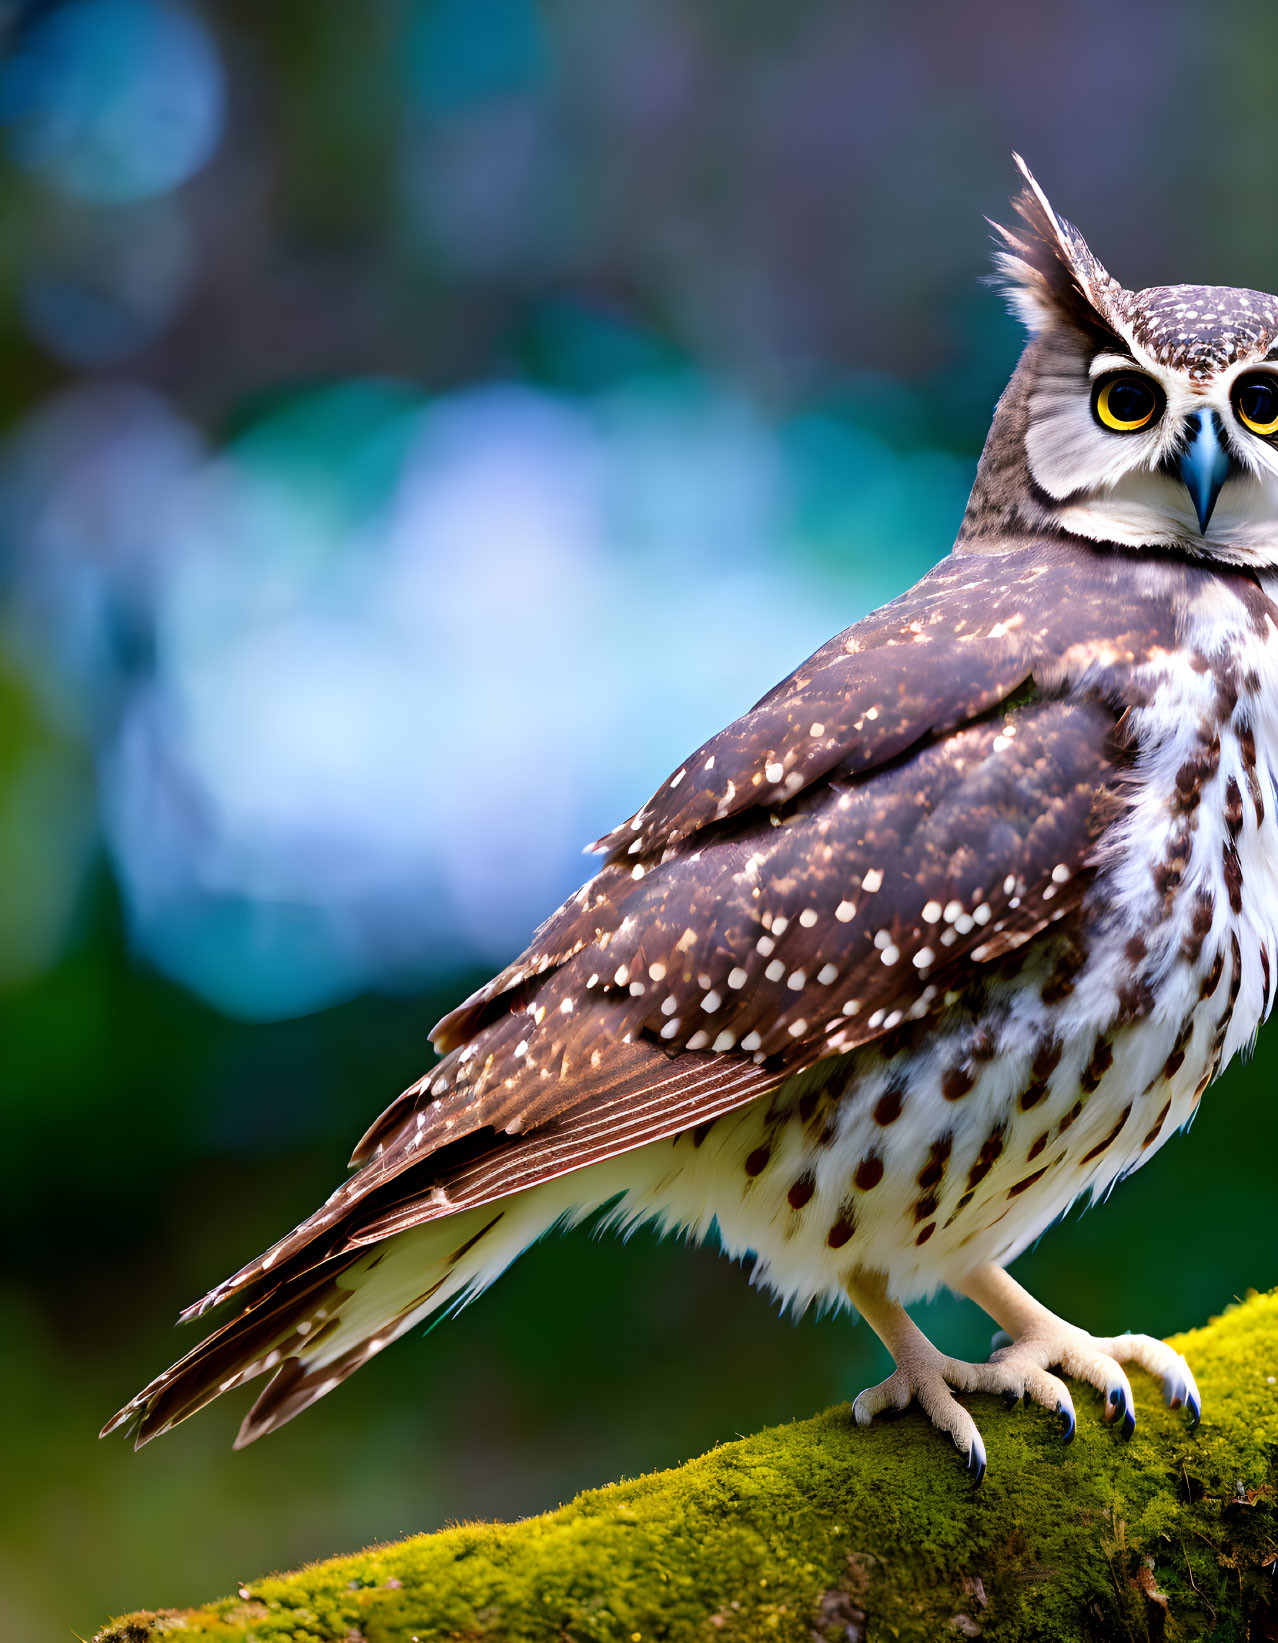 Speckled brown and white owl with yellow eyes perched on mossy branch